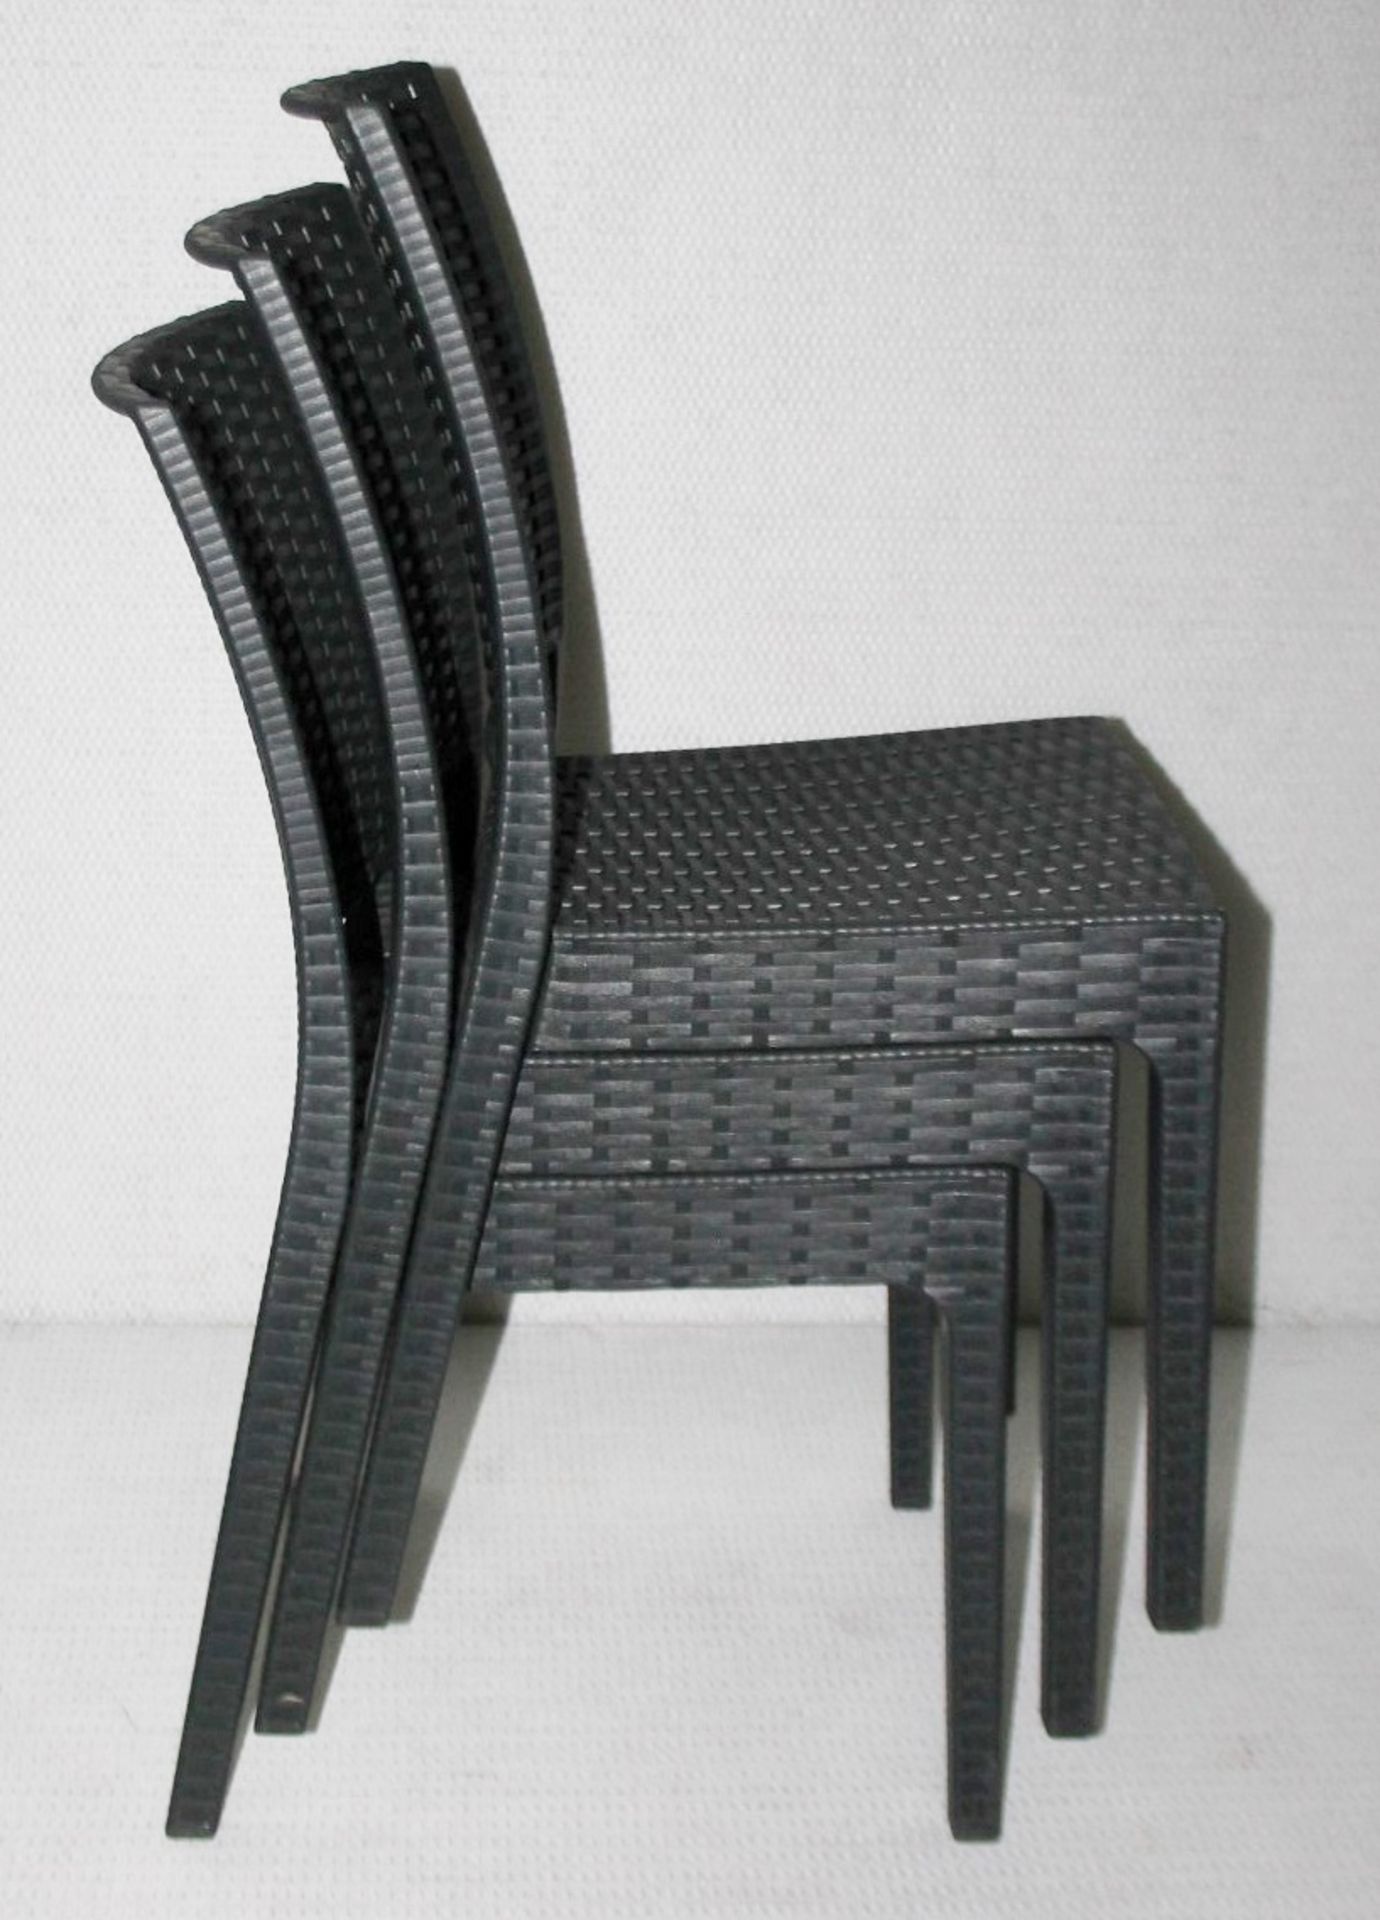 4 x SIESTA EXCLUSIVE 'Florida' Commercial Stackable Rattan-style Chairs In Dark Grey -CL987 - - Image 11 of 13